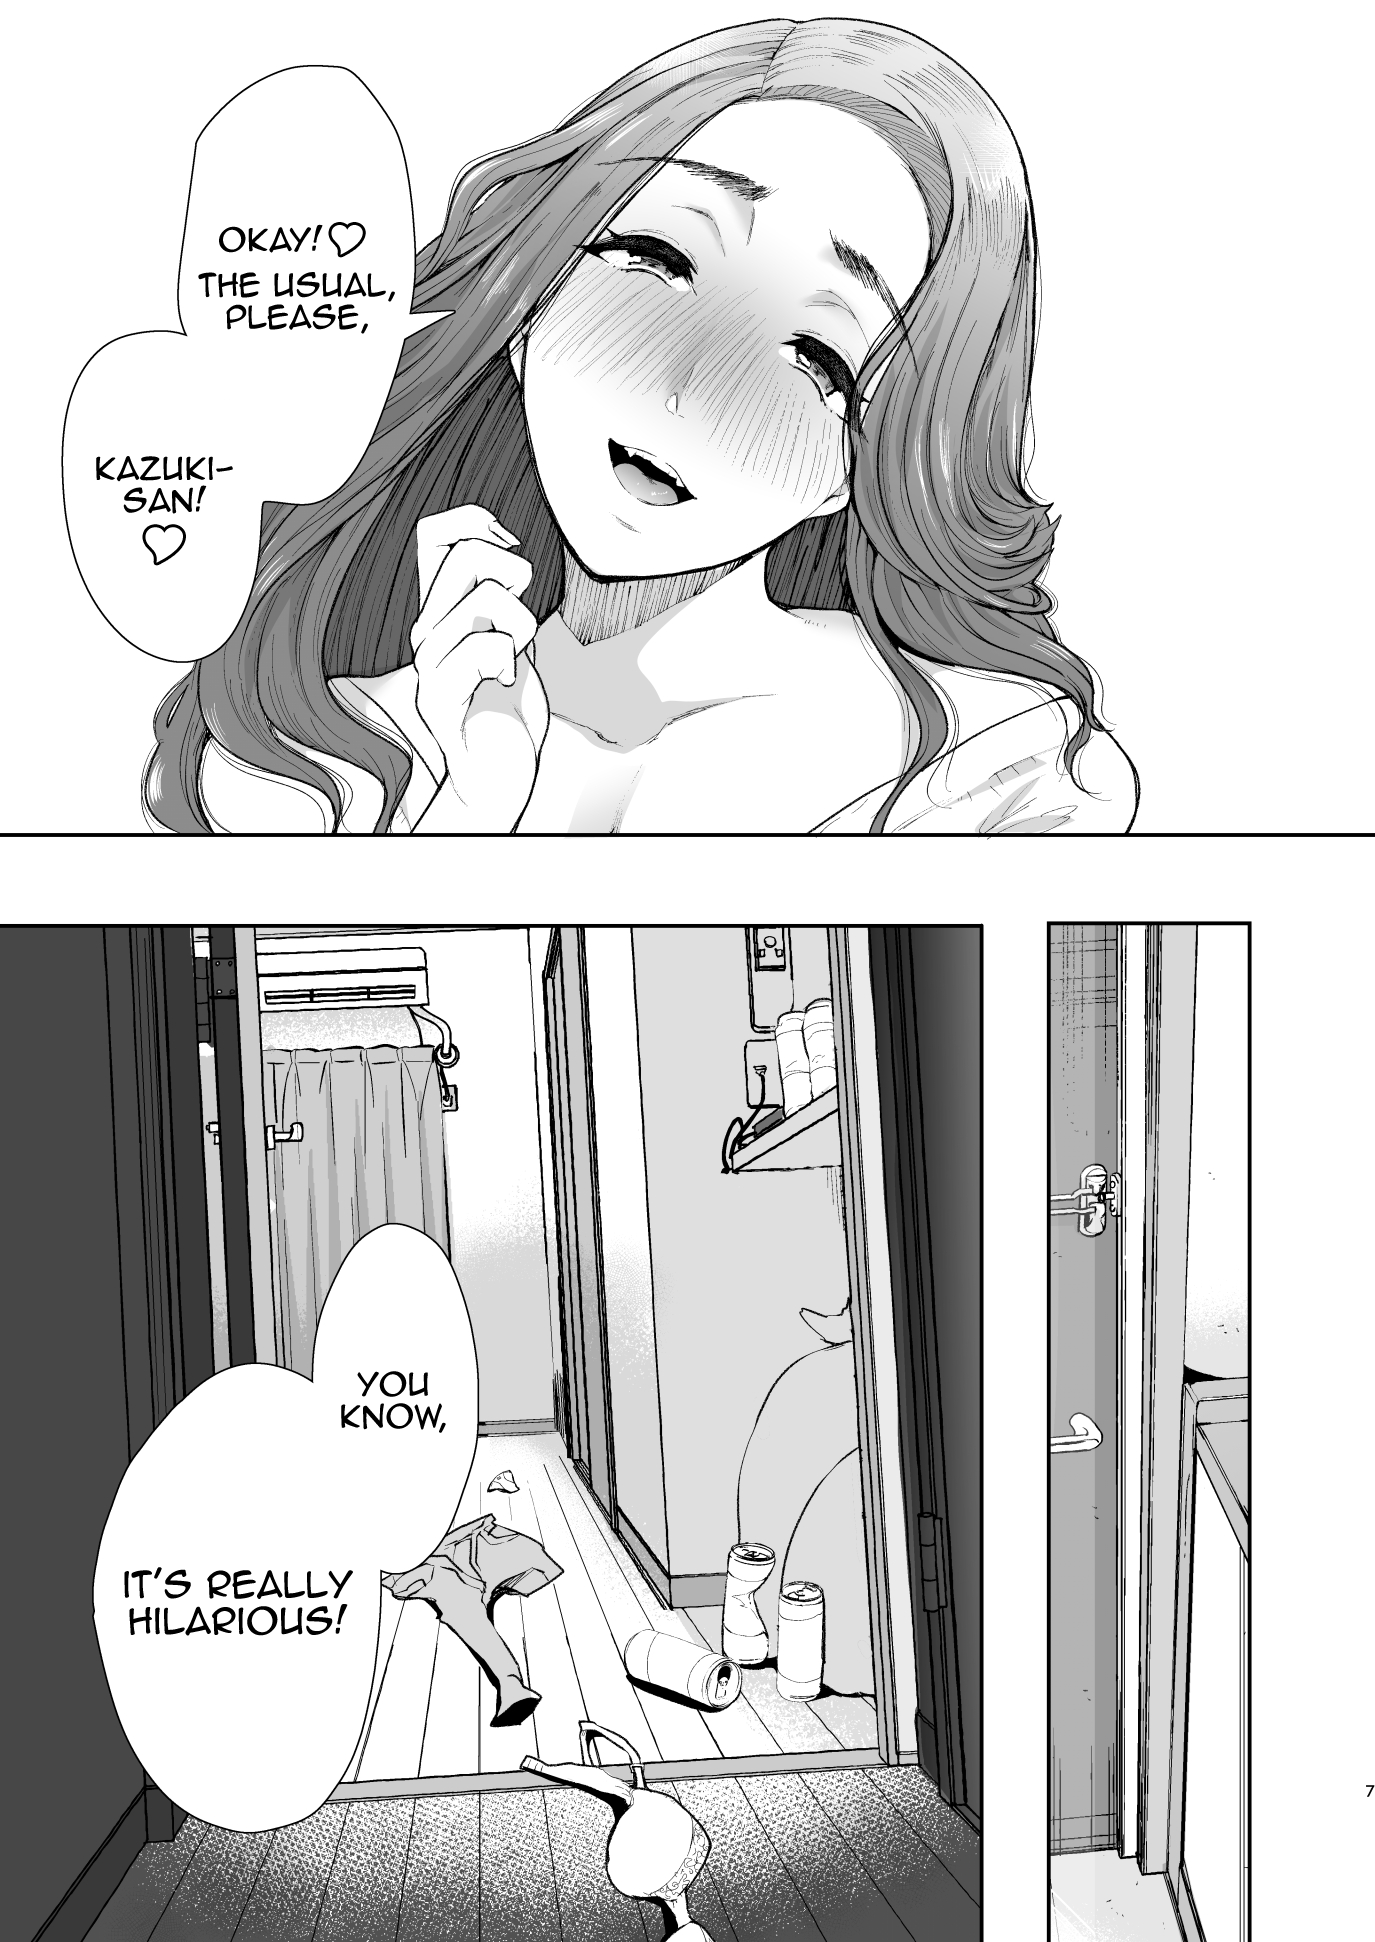 A Story of the Time I Hypnotized and NTRed the MILF Next Door - NTR hentai comics pic